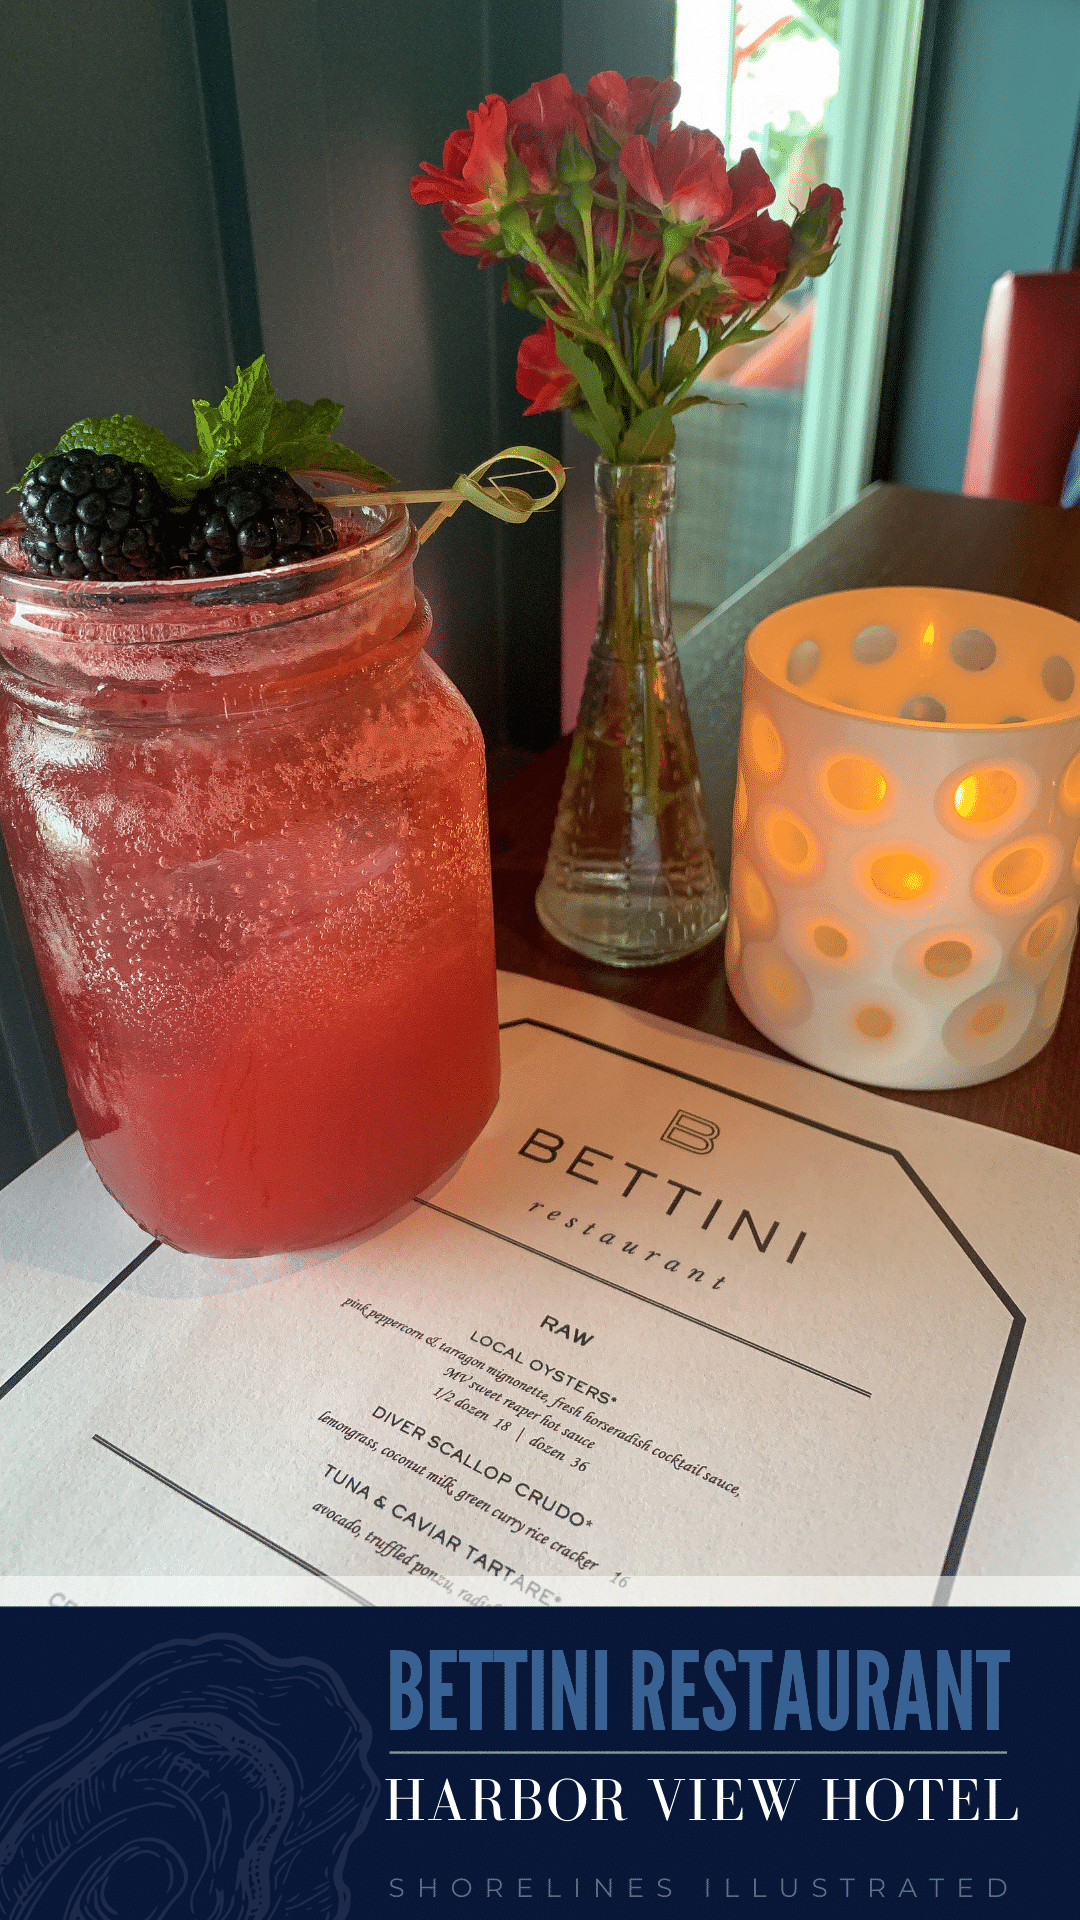 Celebrating a very special occasion at Bettini Restaurant at the Harbor View Hotel in Edgartown Marthas Vineyard